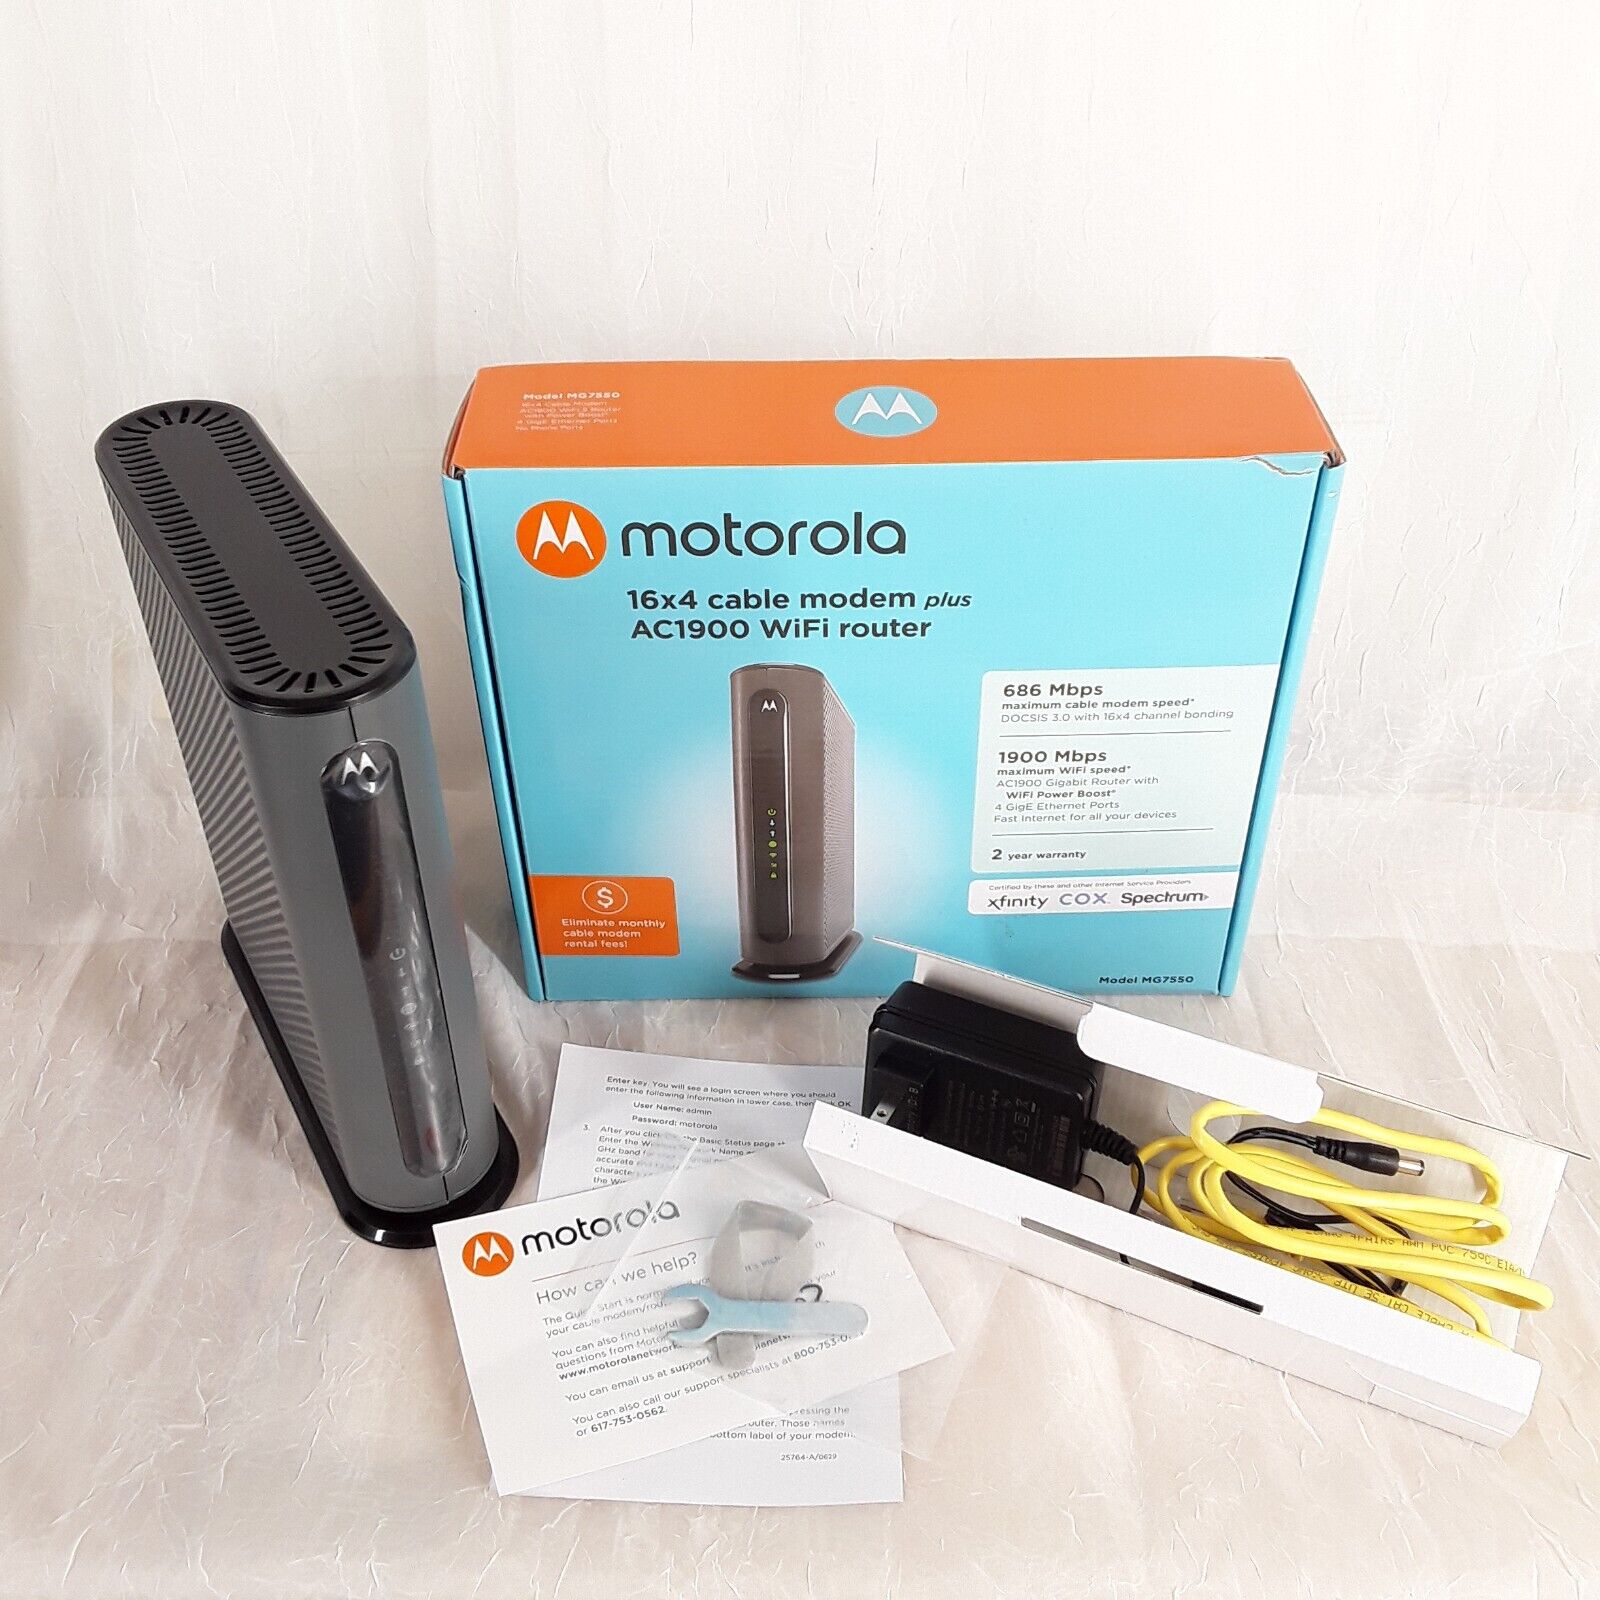 Motorola MG7550, 16x4 DOCSIS 3.0 Cable Modem plus AC1900 WiFi Router Power Boost